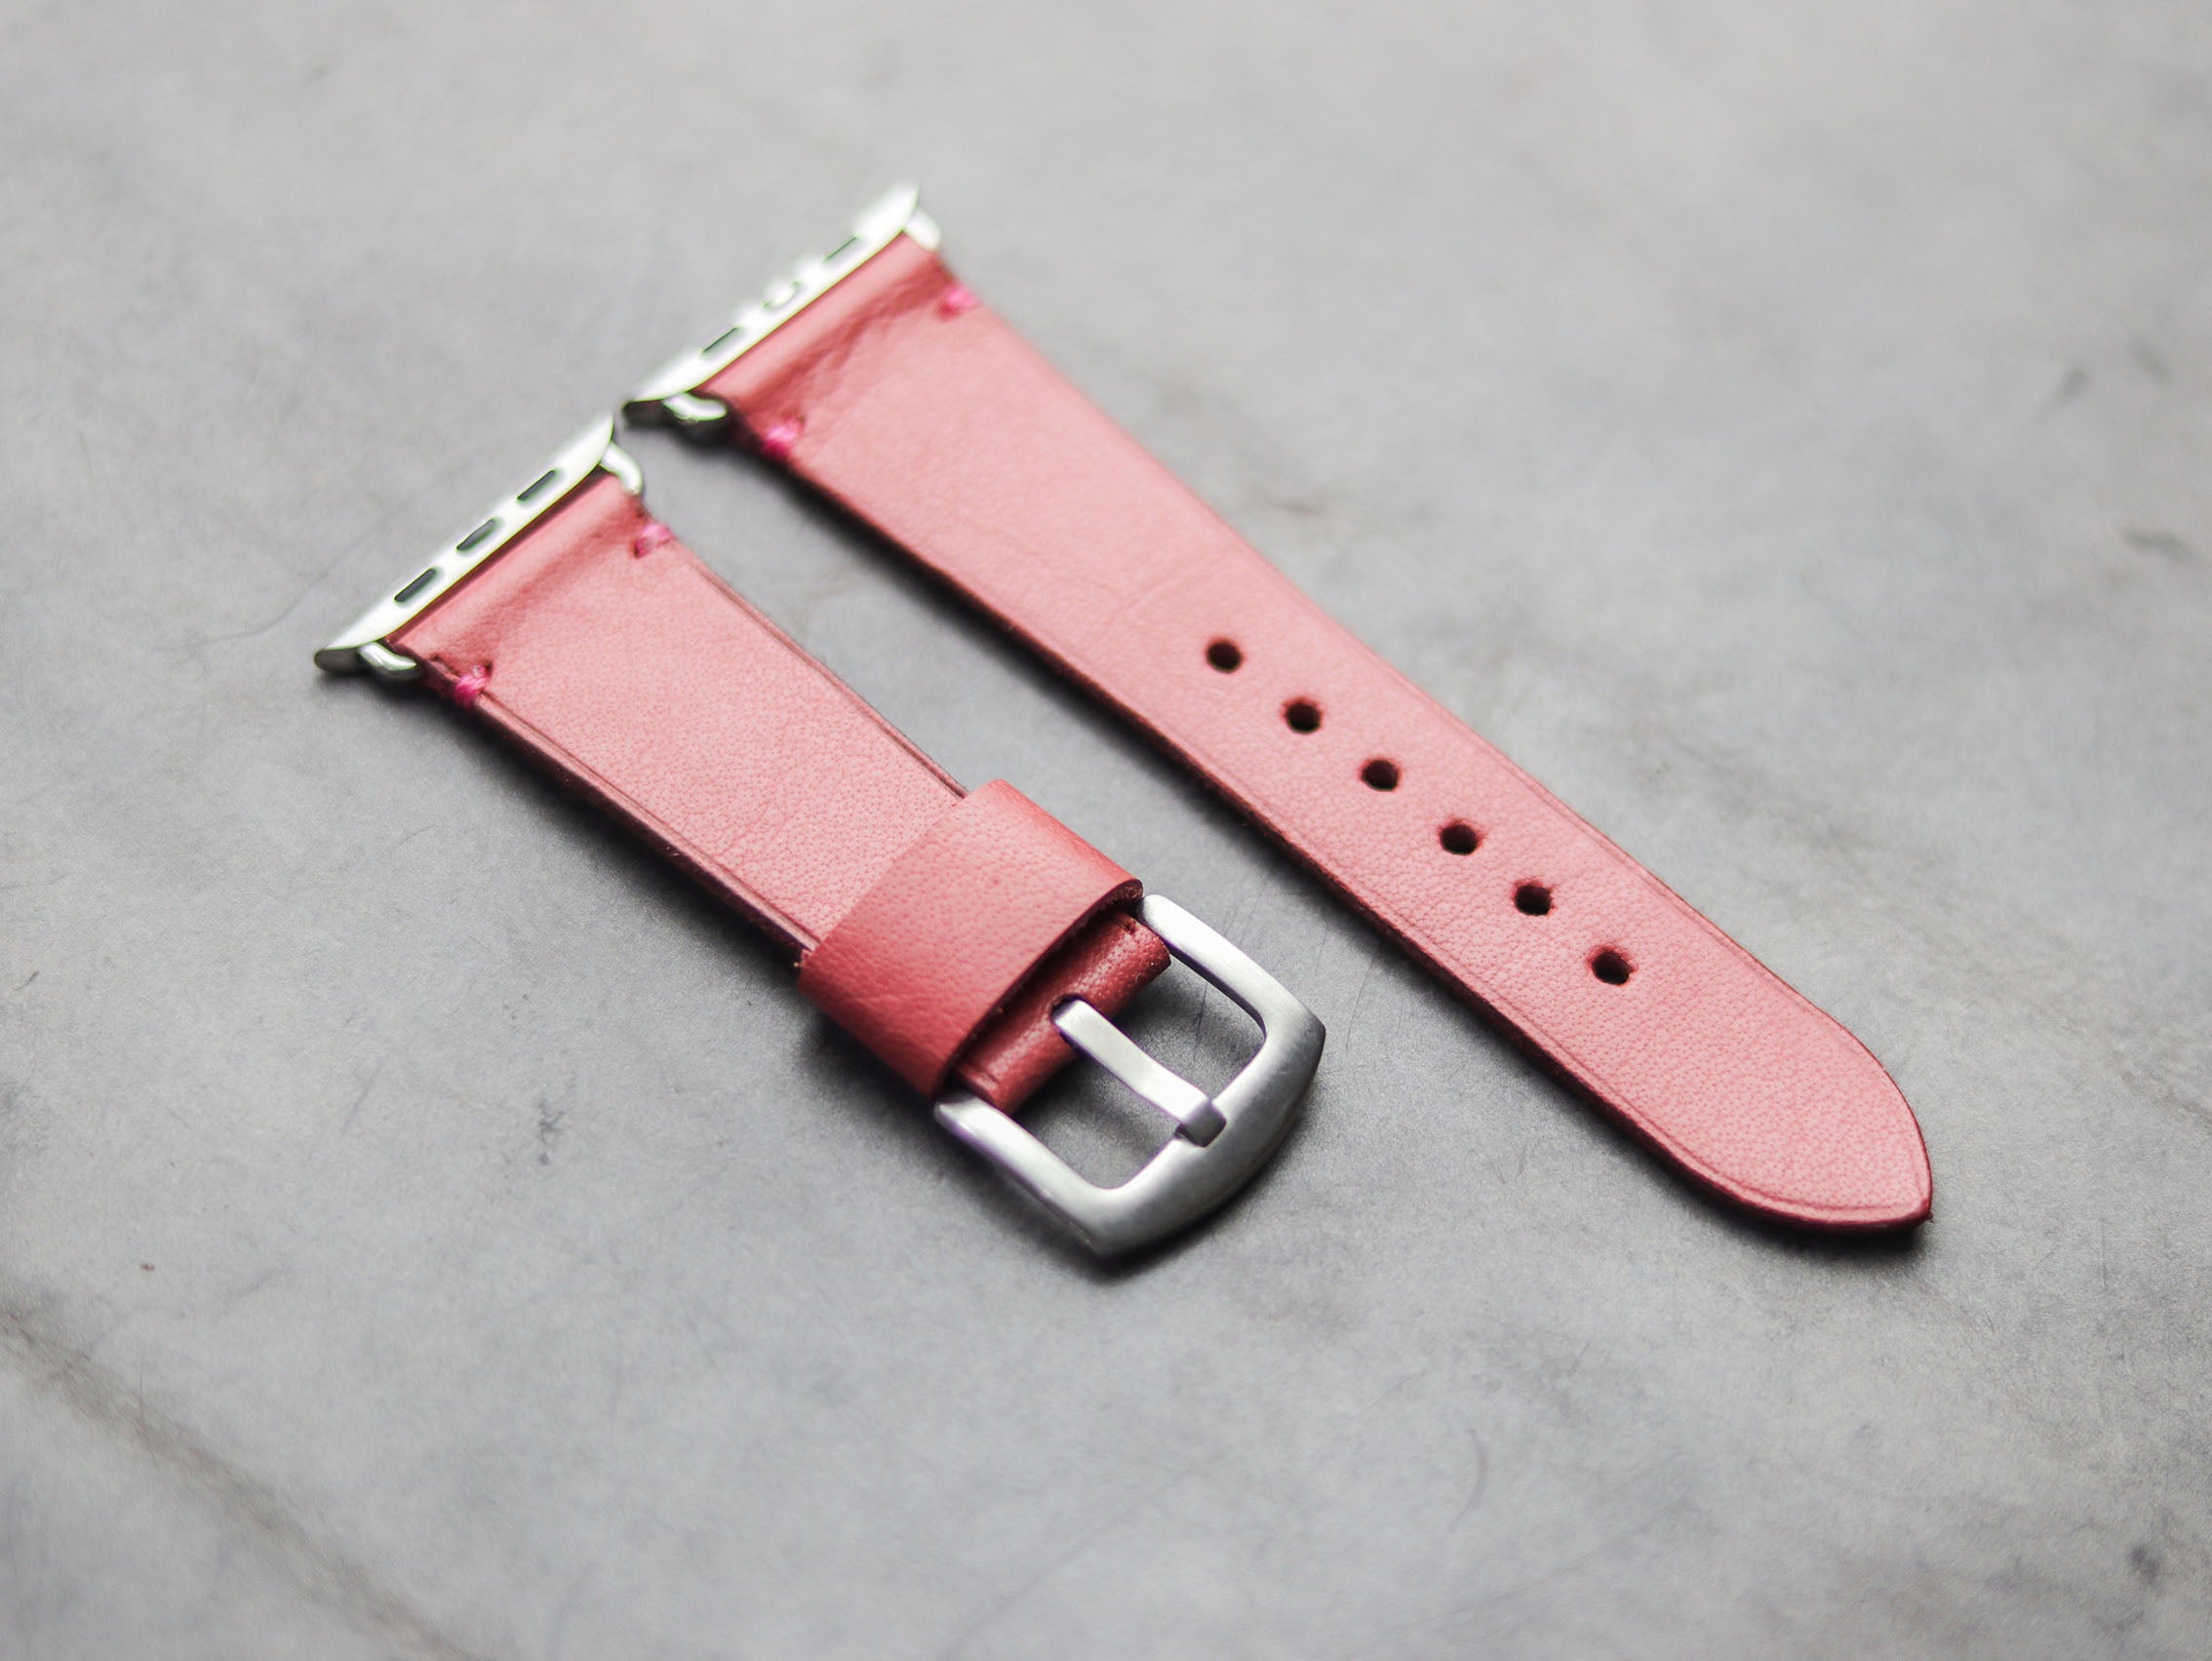 FLAMINGO PINK MINIMAL STITCHED HAND-CRAFTED APPLE WATCH STRAPS